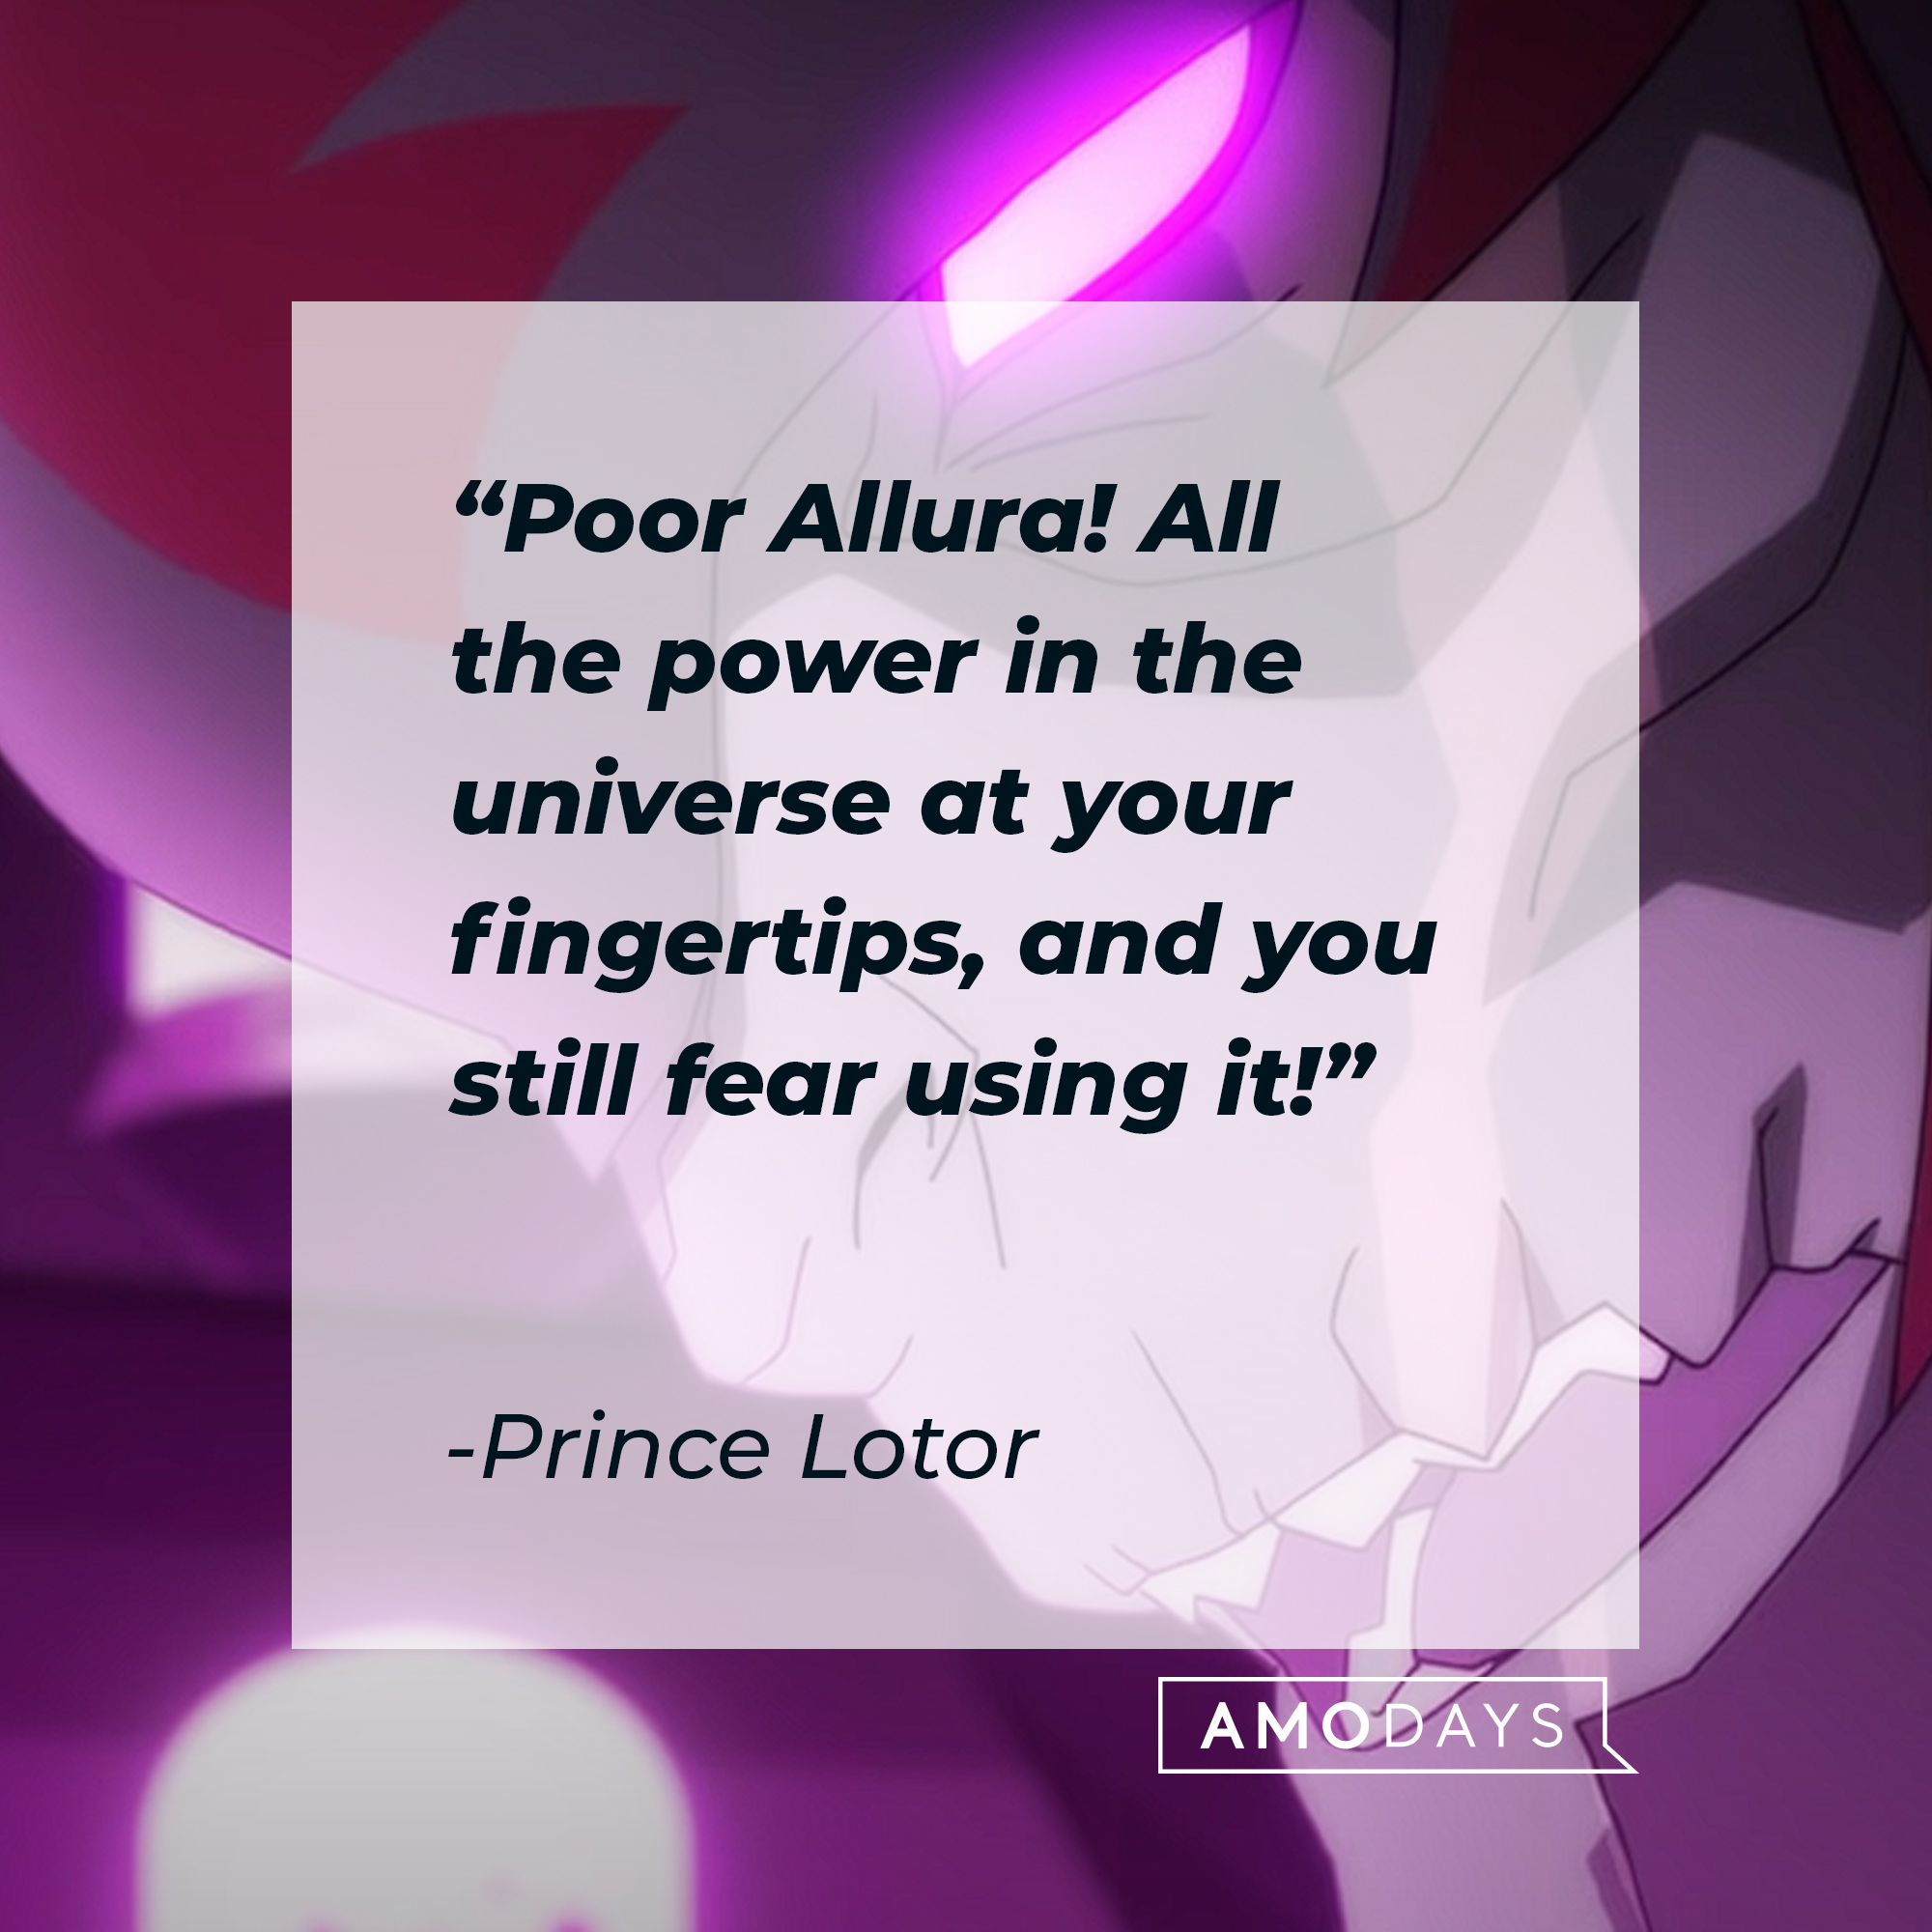 Prince Lotor's quote: "Poor Allura! All the power in the universe at your fingertips, and you still fear using it!" | Source: youtube.com/netflixafterschool